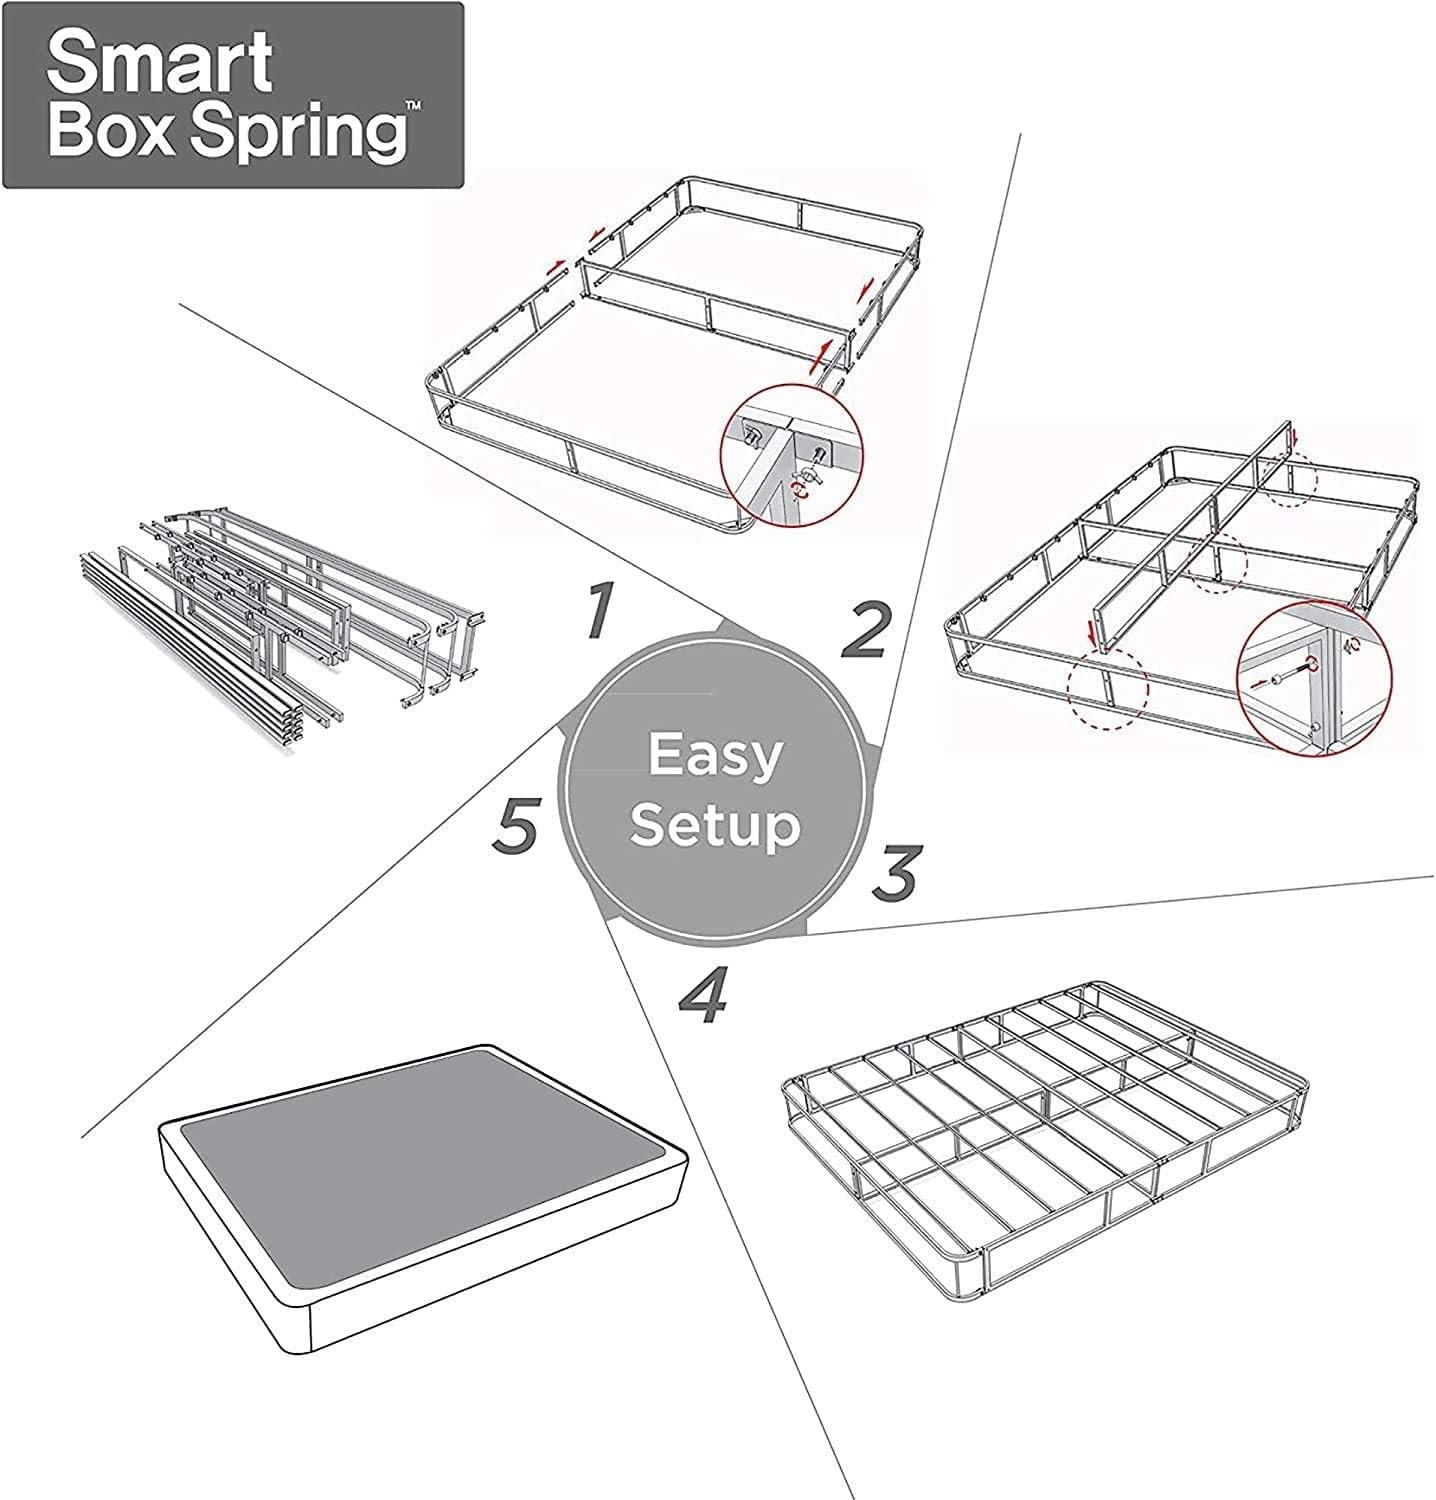 Like NEW - ZINUS 5 Inch Metal Smart Box Spring, 700 lbs Mattress Foundation, Strong Frame, Easy Assembly, Queen - Retail $164